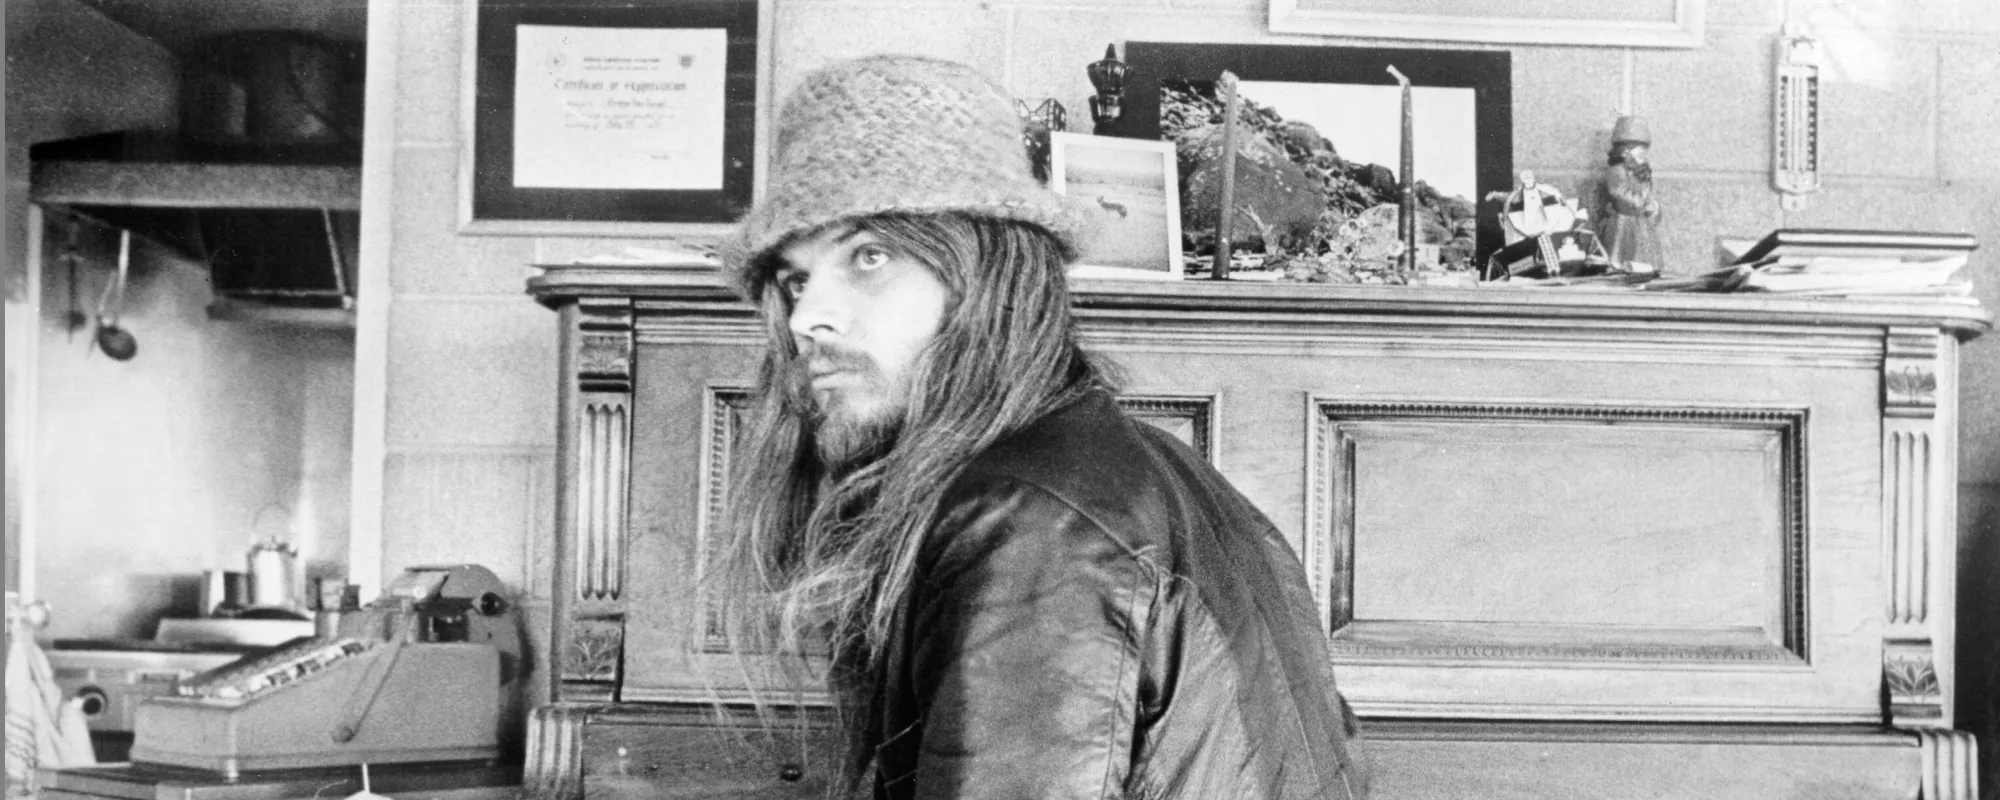 The Unconfirmed Subject Behind “A Song For You” by Leon Russell